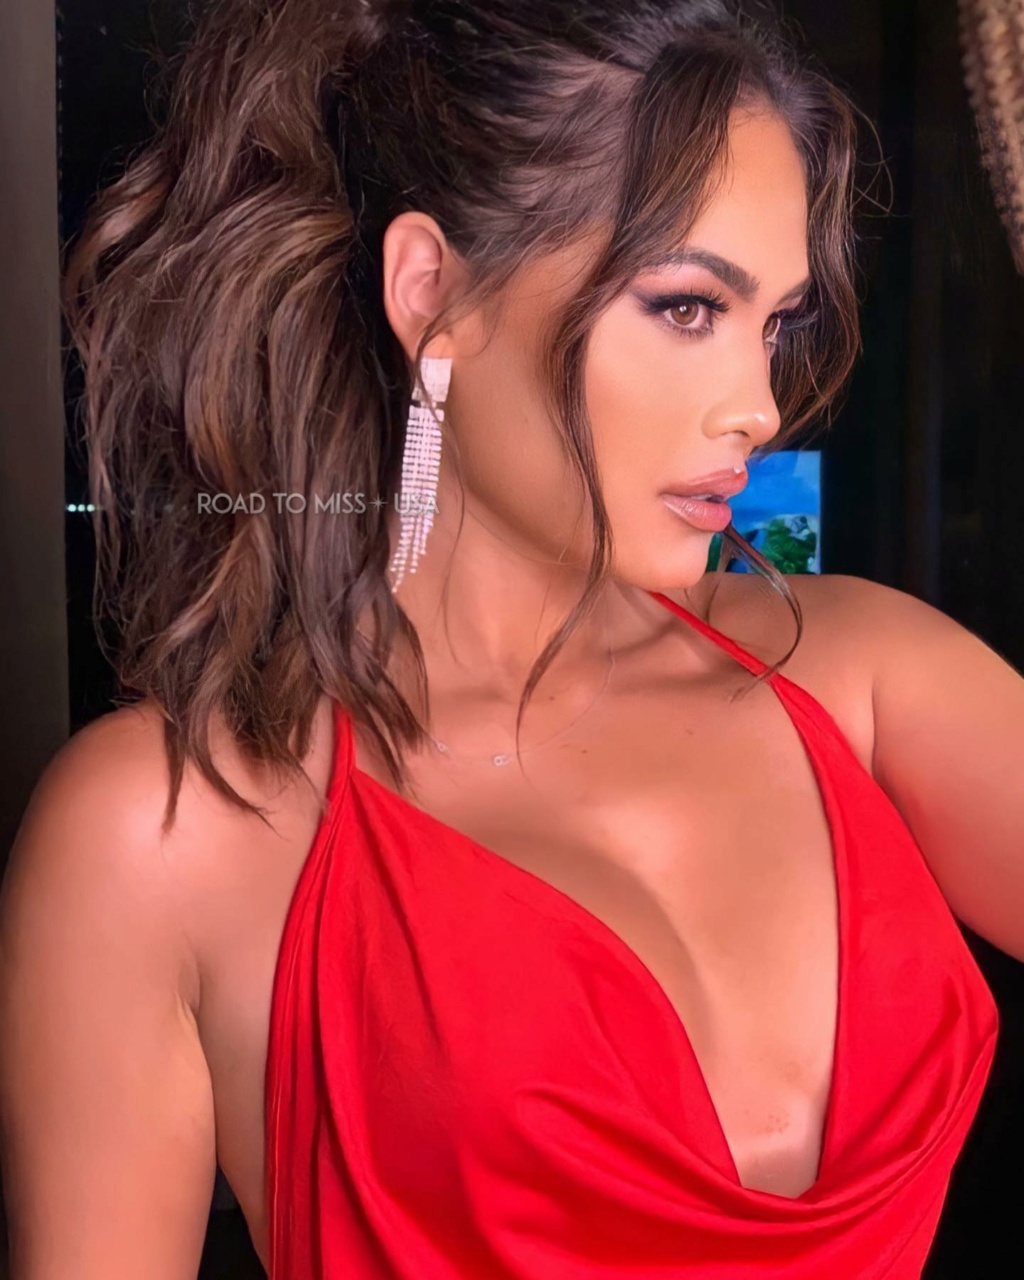 The Official Thread Of Miss Universe 2020 - Andrea Meza of Mexico  - Page 6 24210216